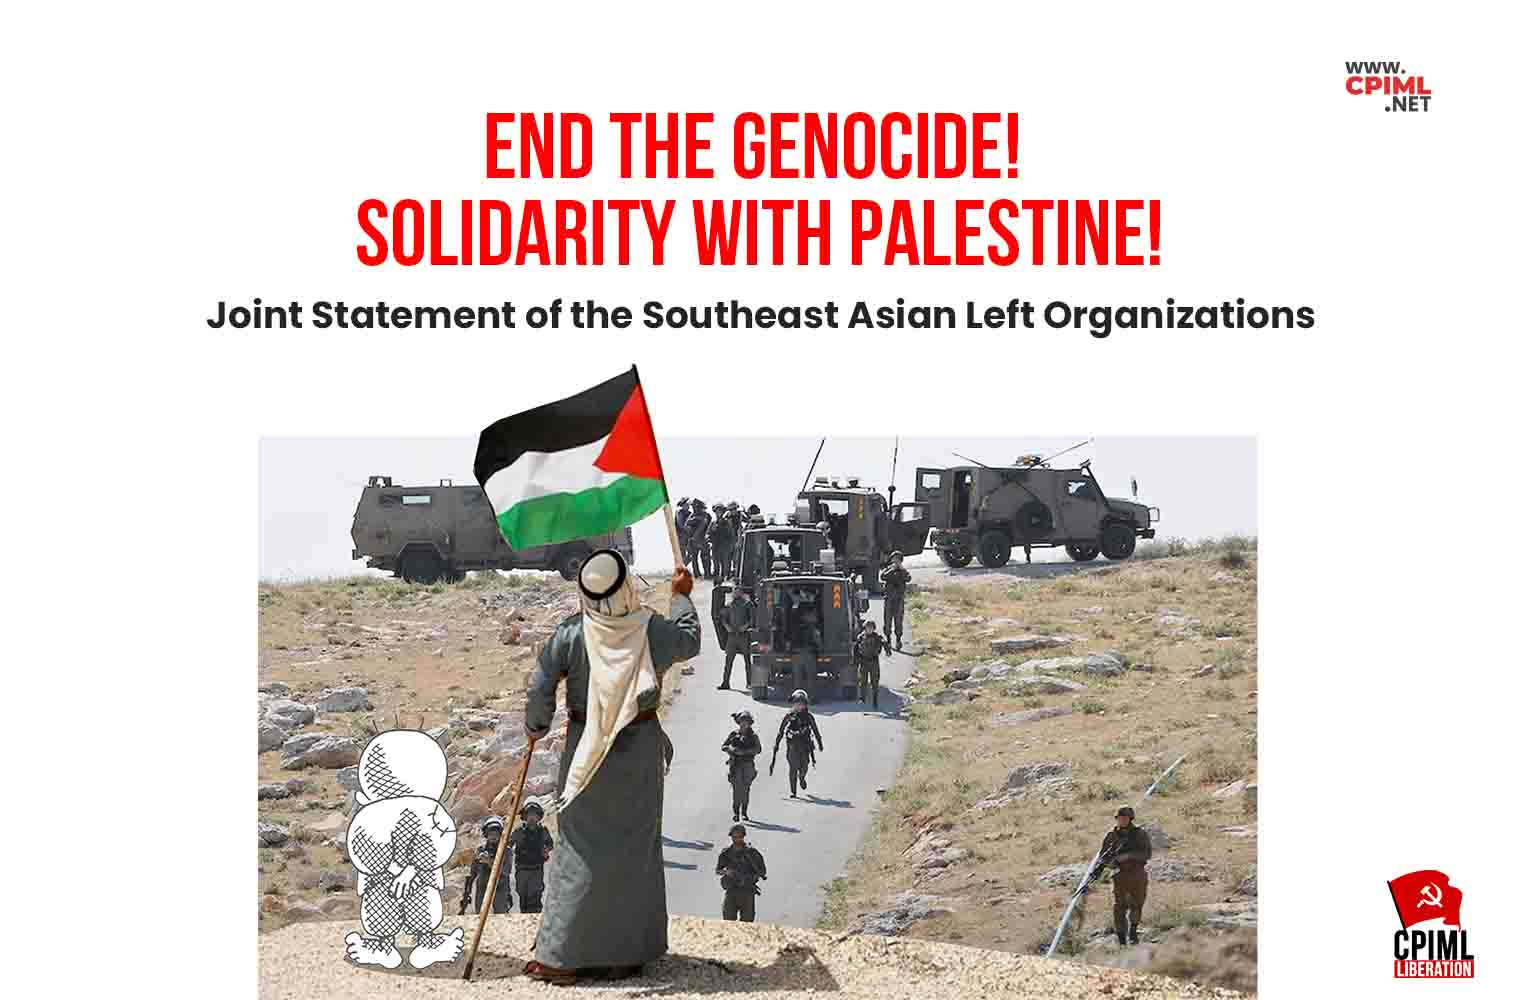 End the genocide! Solidarity with Palestine! - Joint Statement of the Southeast Asian Left Organizations